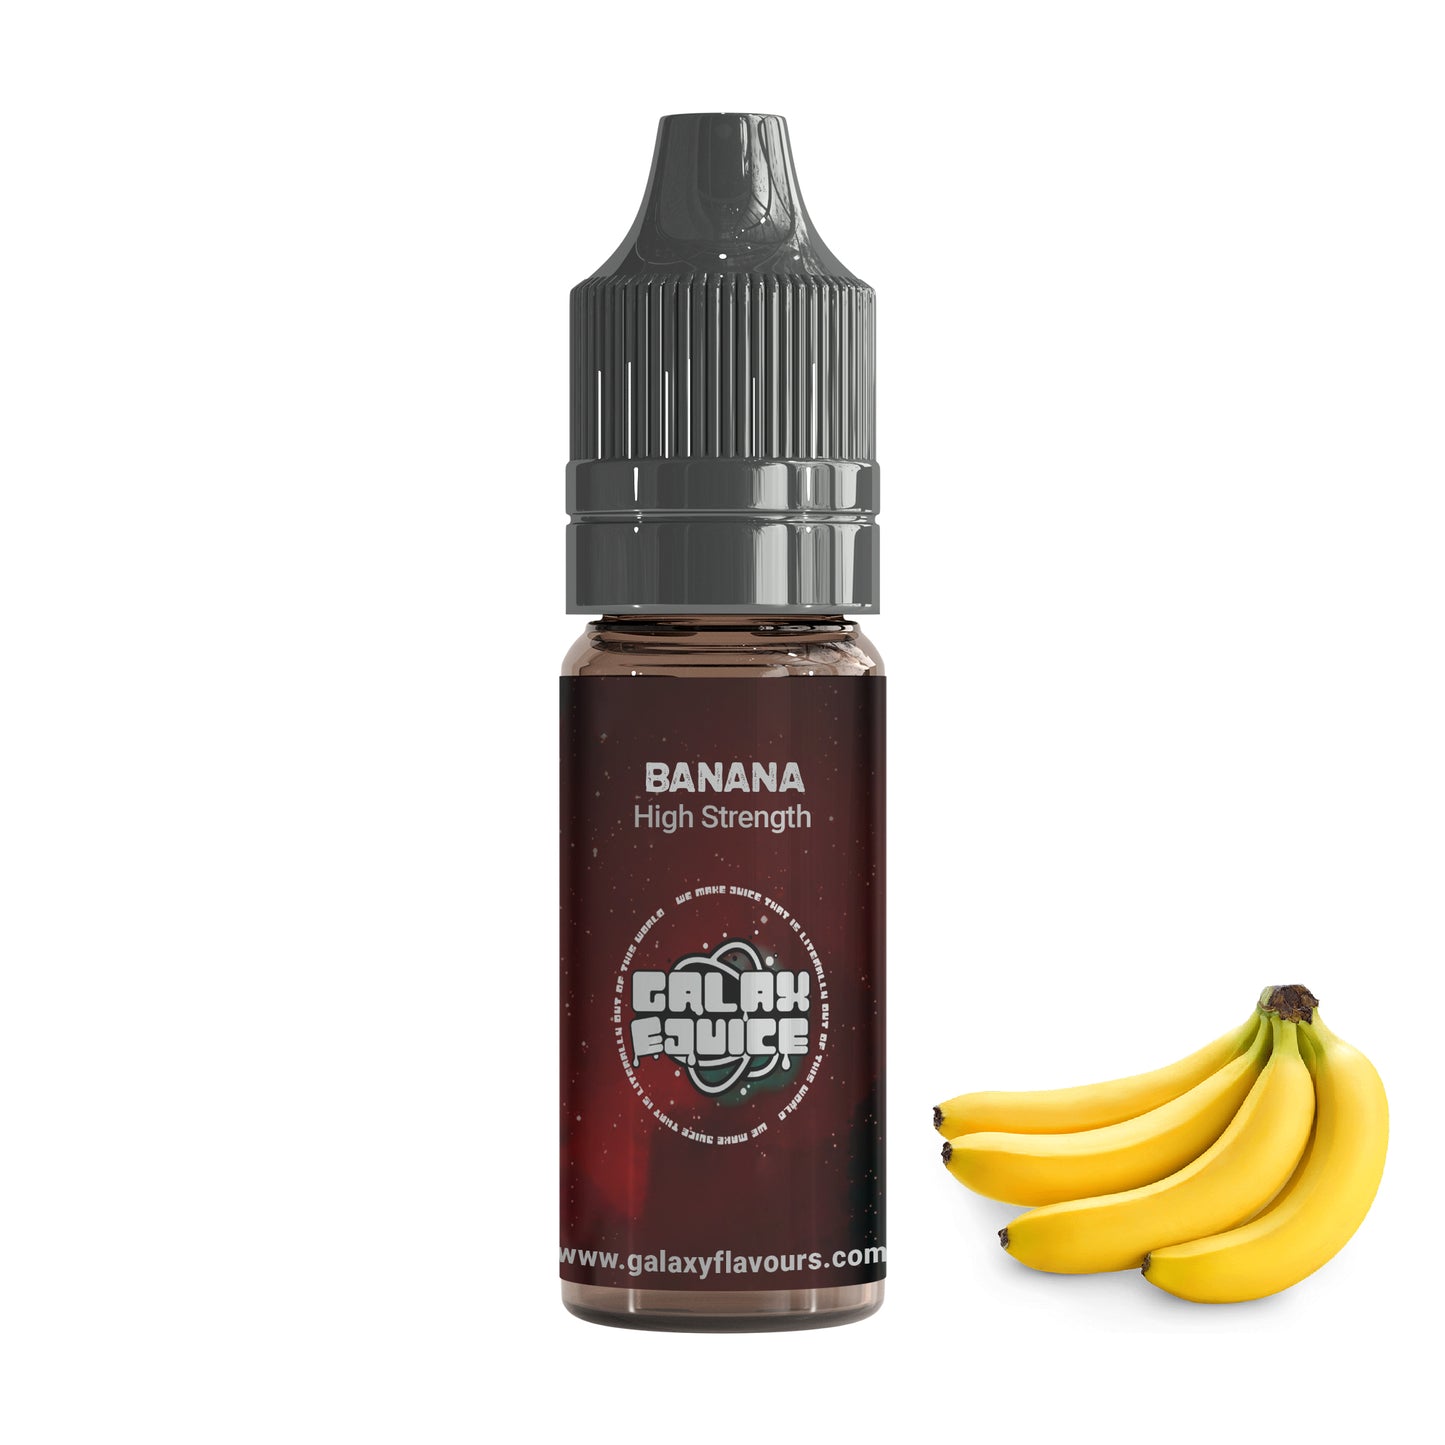 Banana High Strength Professional Flavouring.